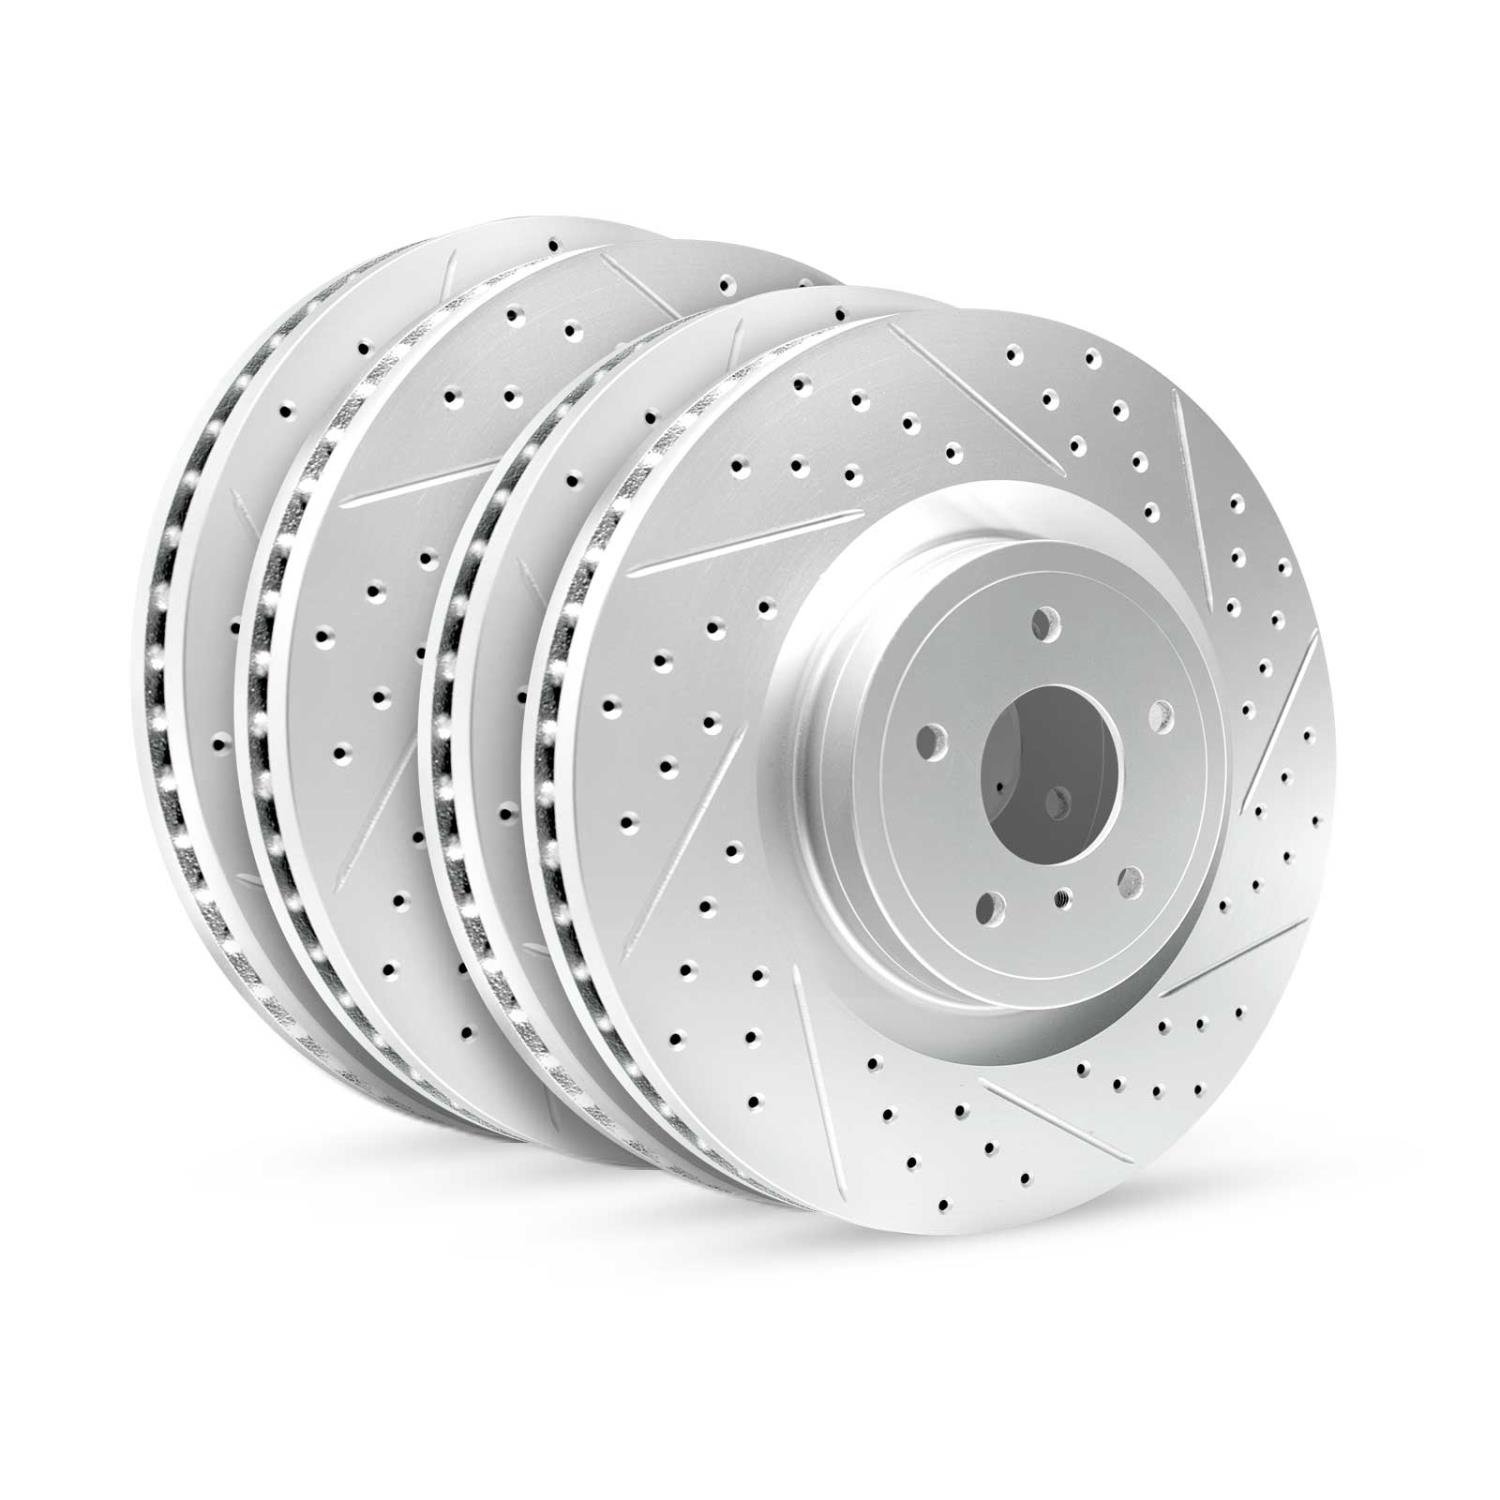 GEO-Carbon Drilled/Slotted Rotors, 2017-2020 Fits Multiple